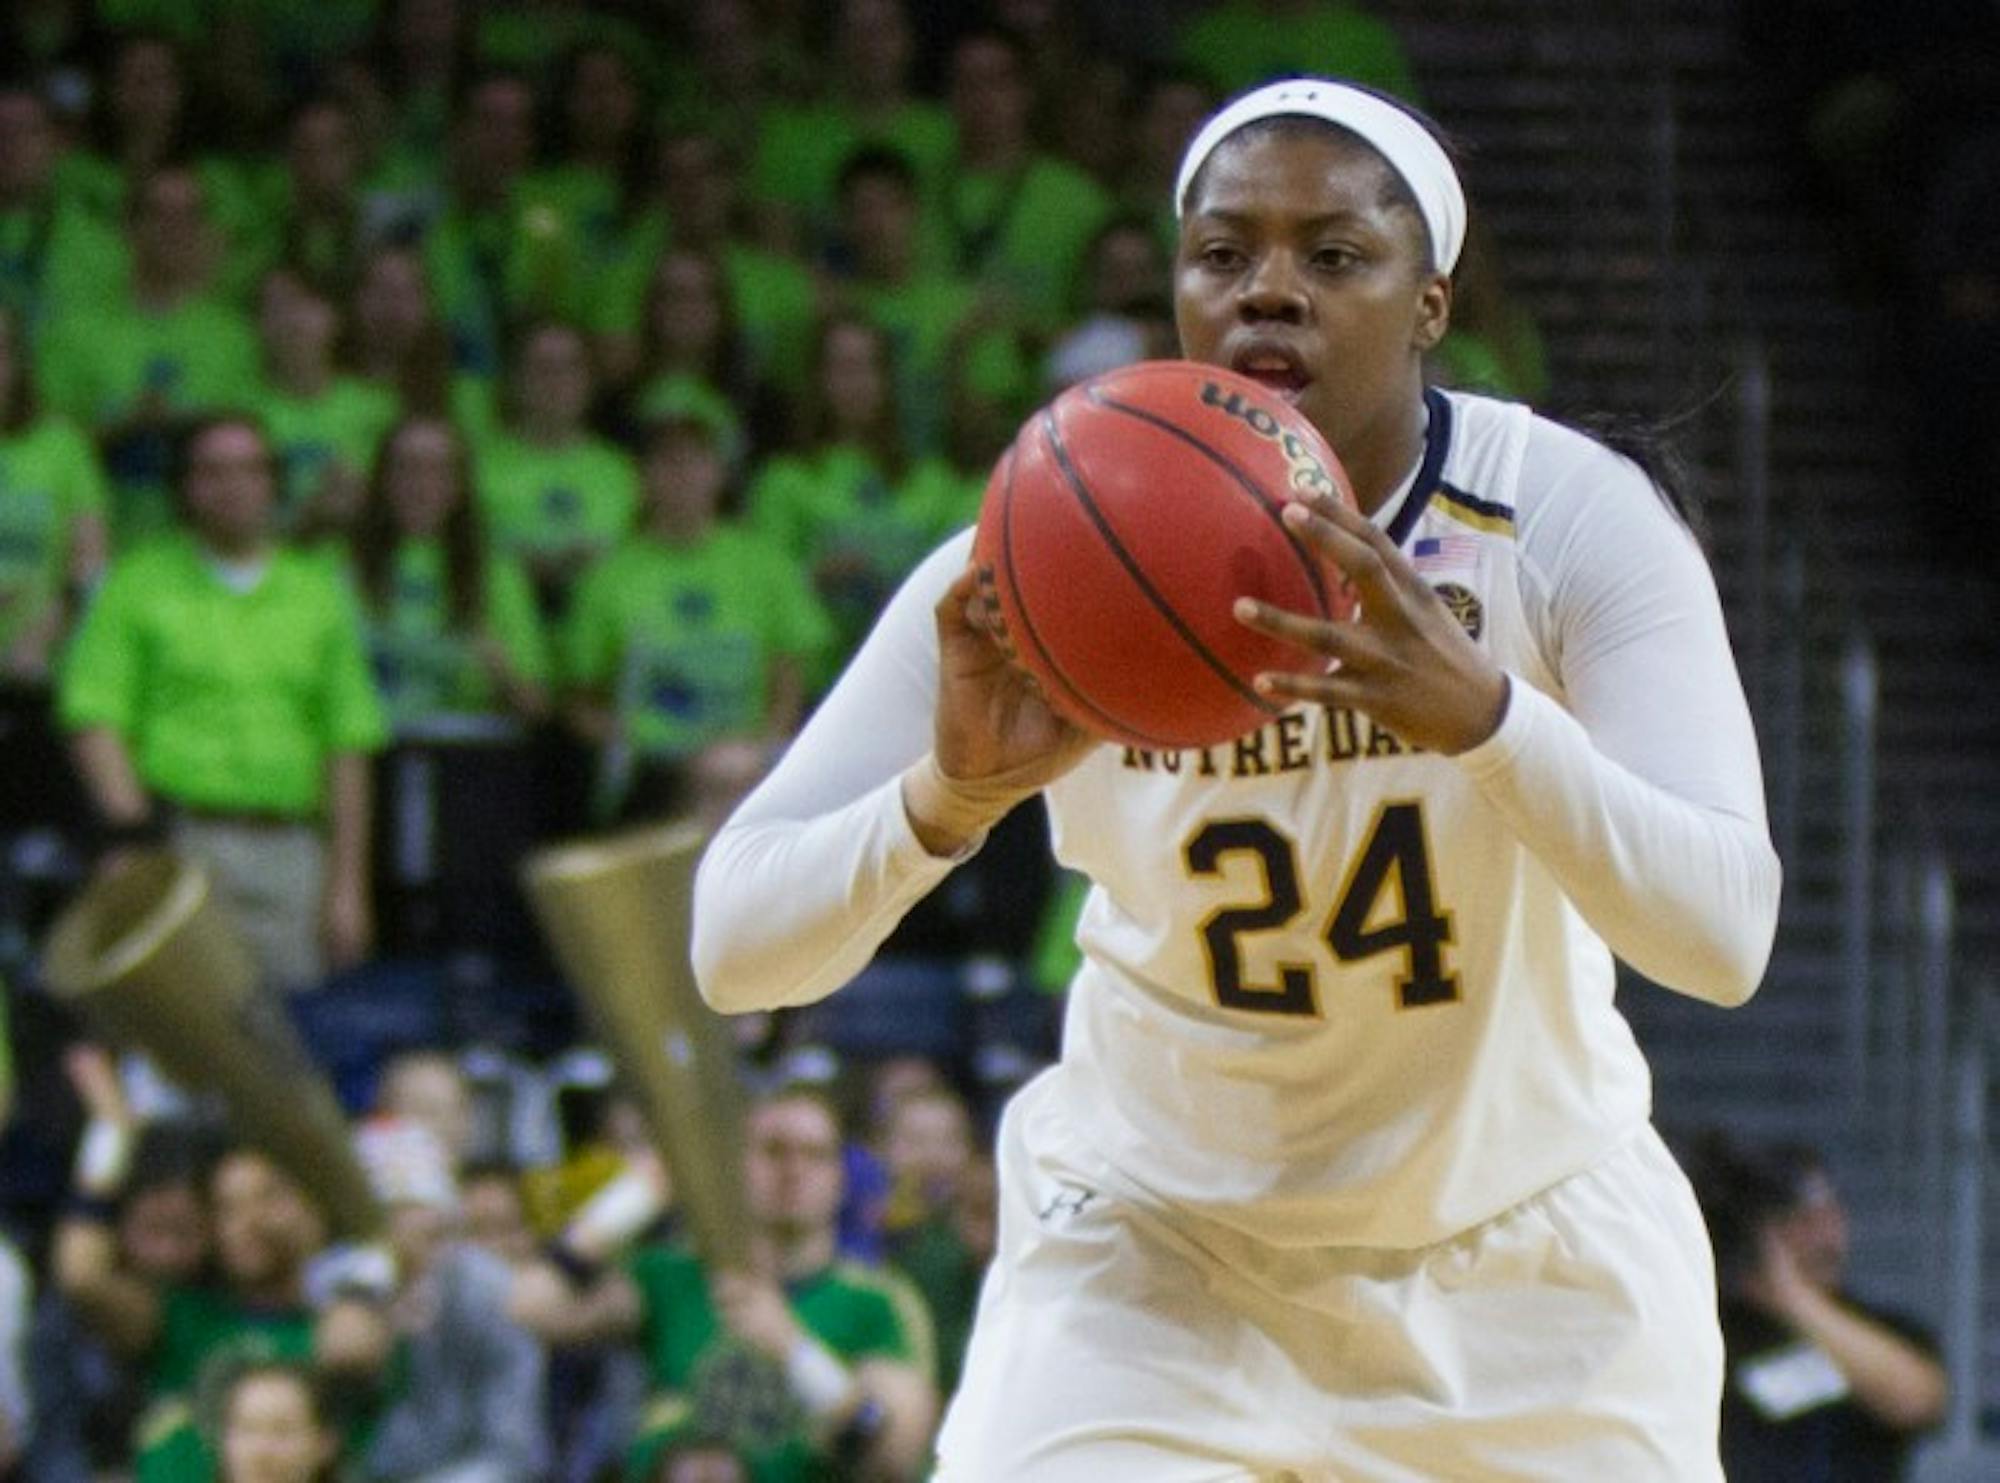 Irish sophomore guard Arike Ogunbowale looks to make a pass during Notre Dame's win over Virginia on Sunday at Purcell Pavilion.